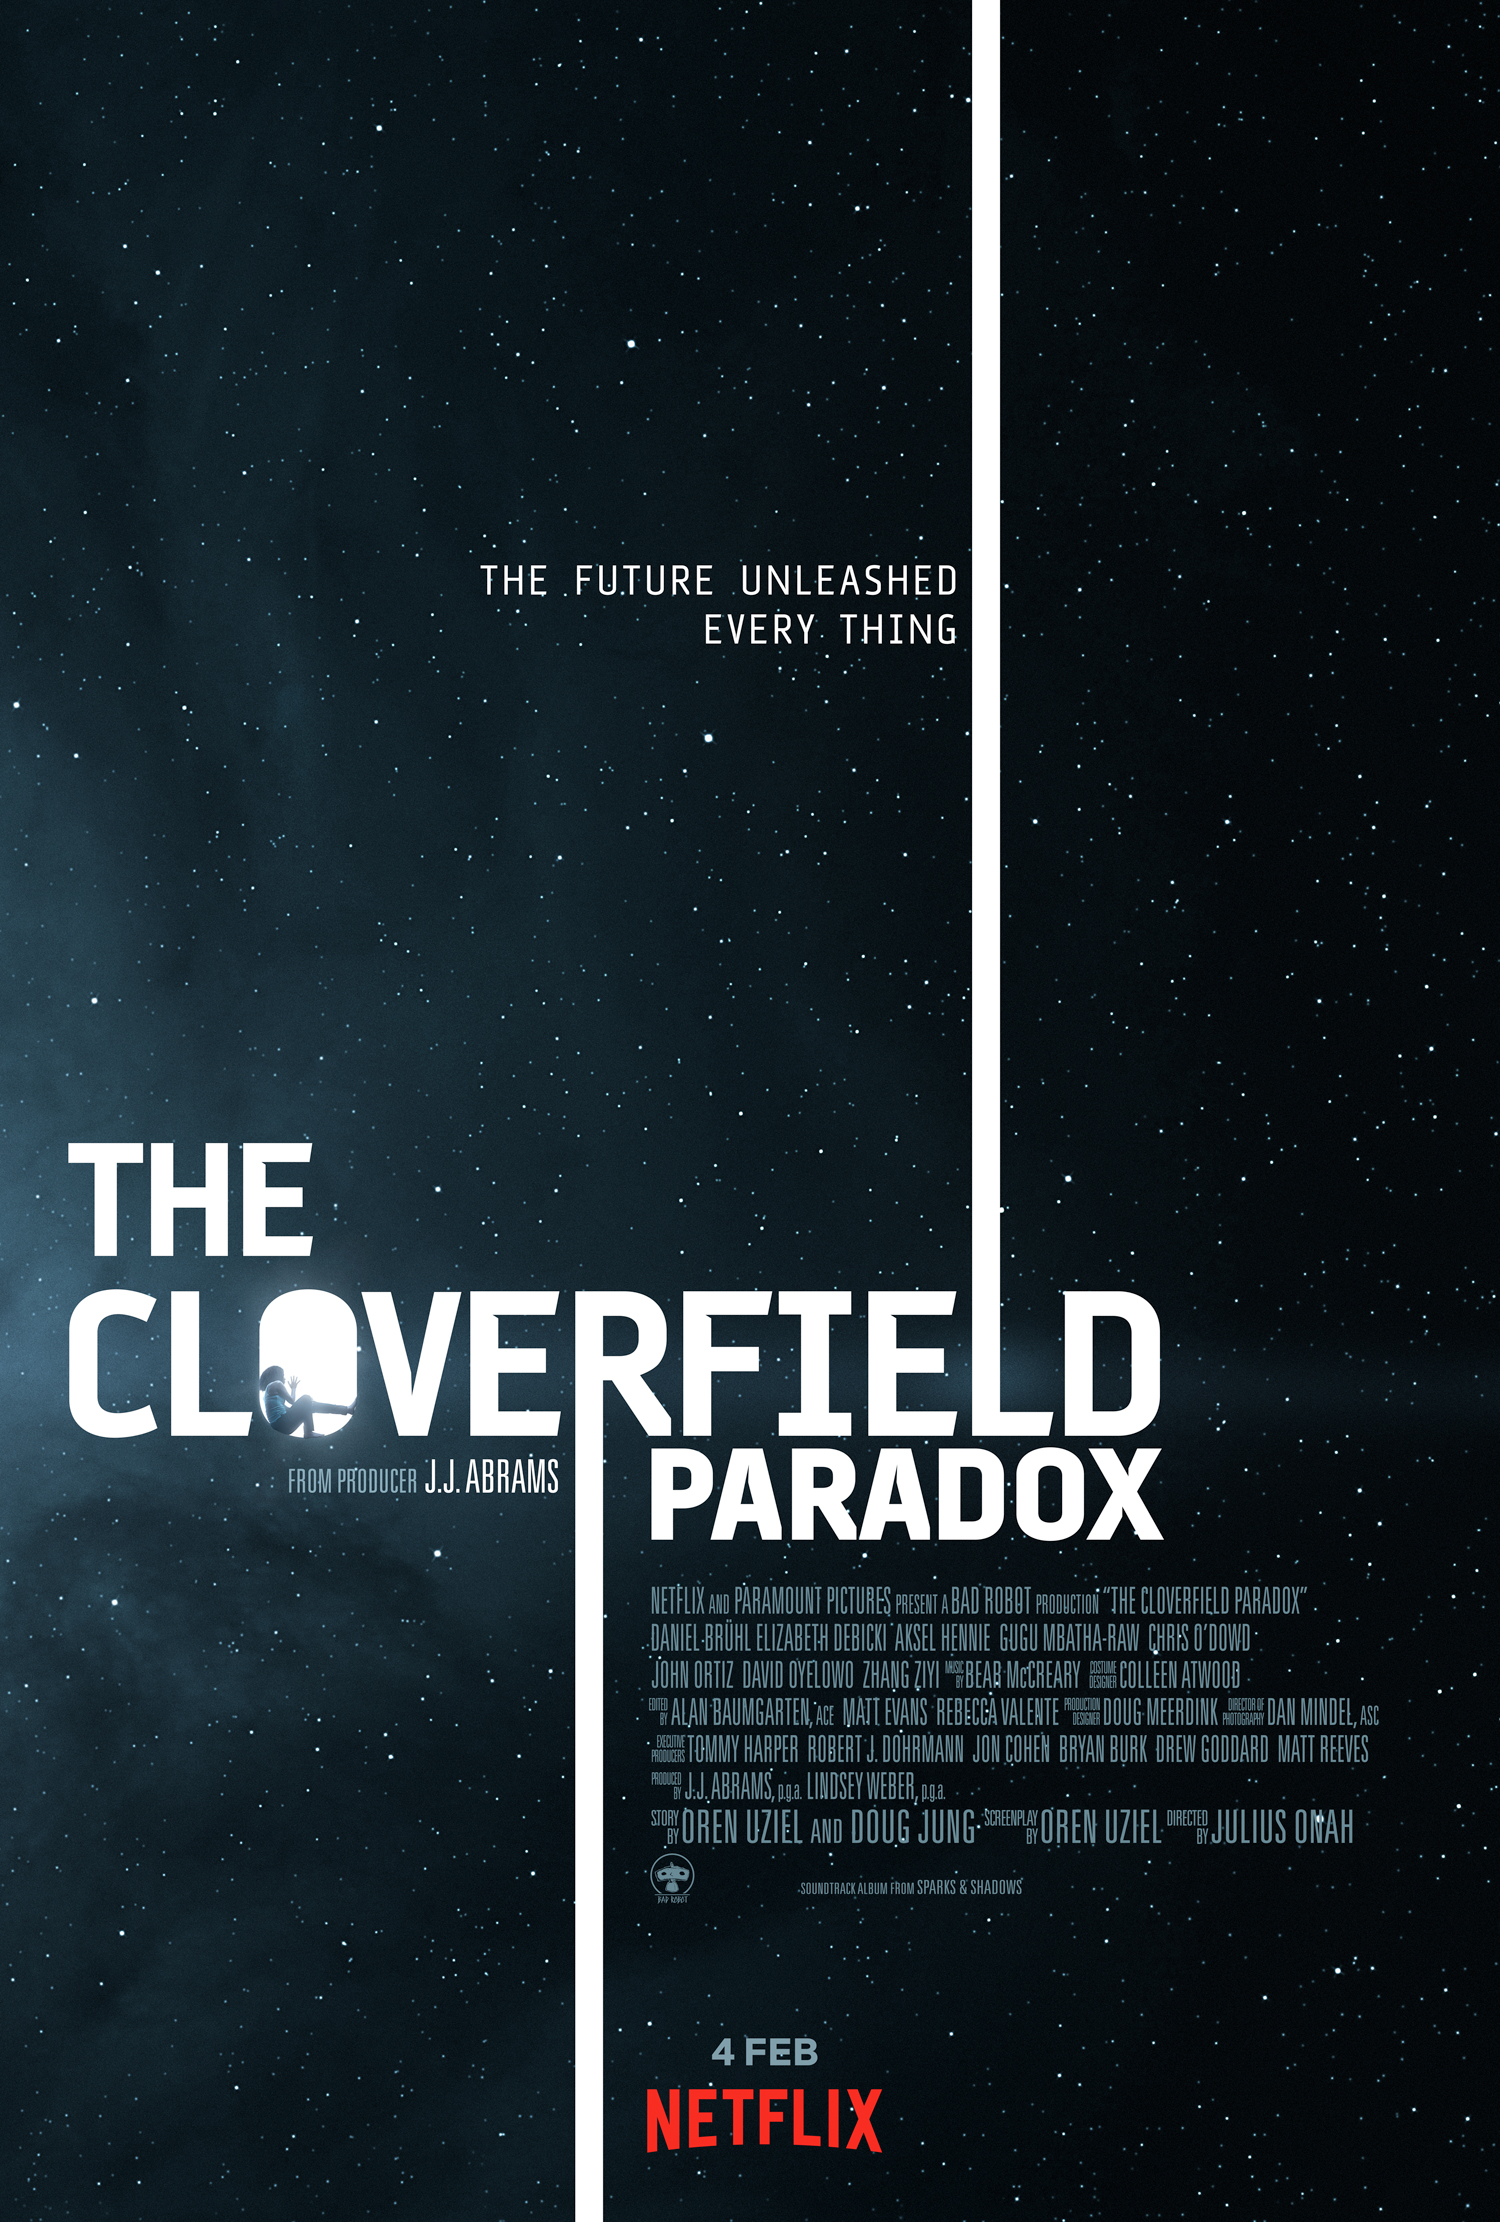 The Cloverfield Paradox film review: surprise release success or sub-par spinoff?